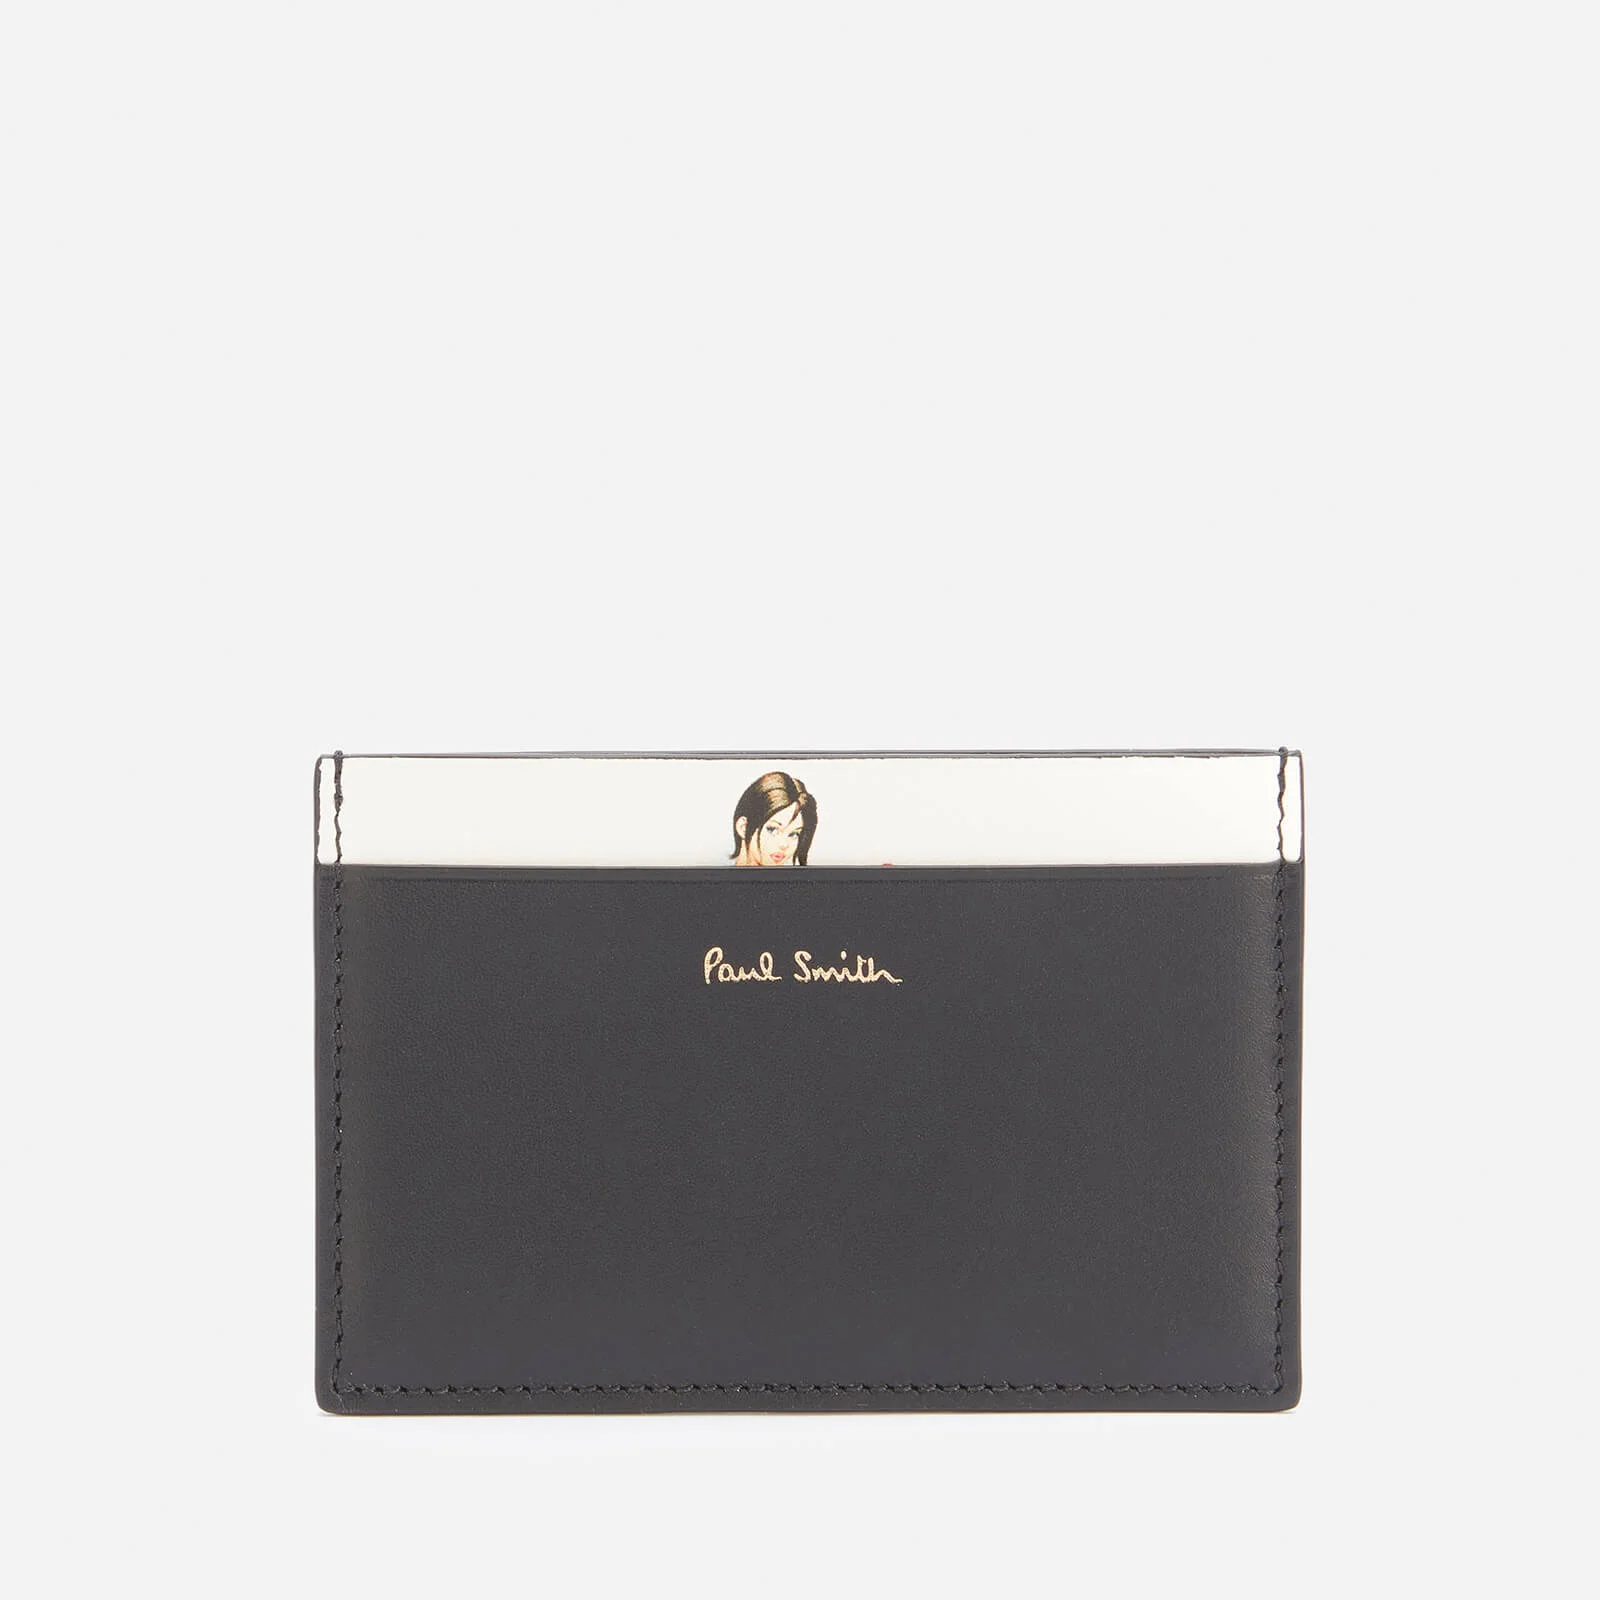 PS Paul Smith Men's Naked Lady Credit Card Case - Black Image 1